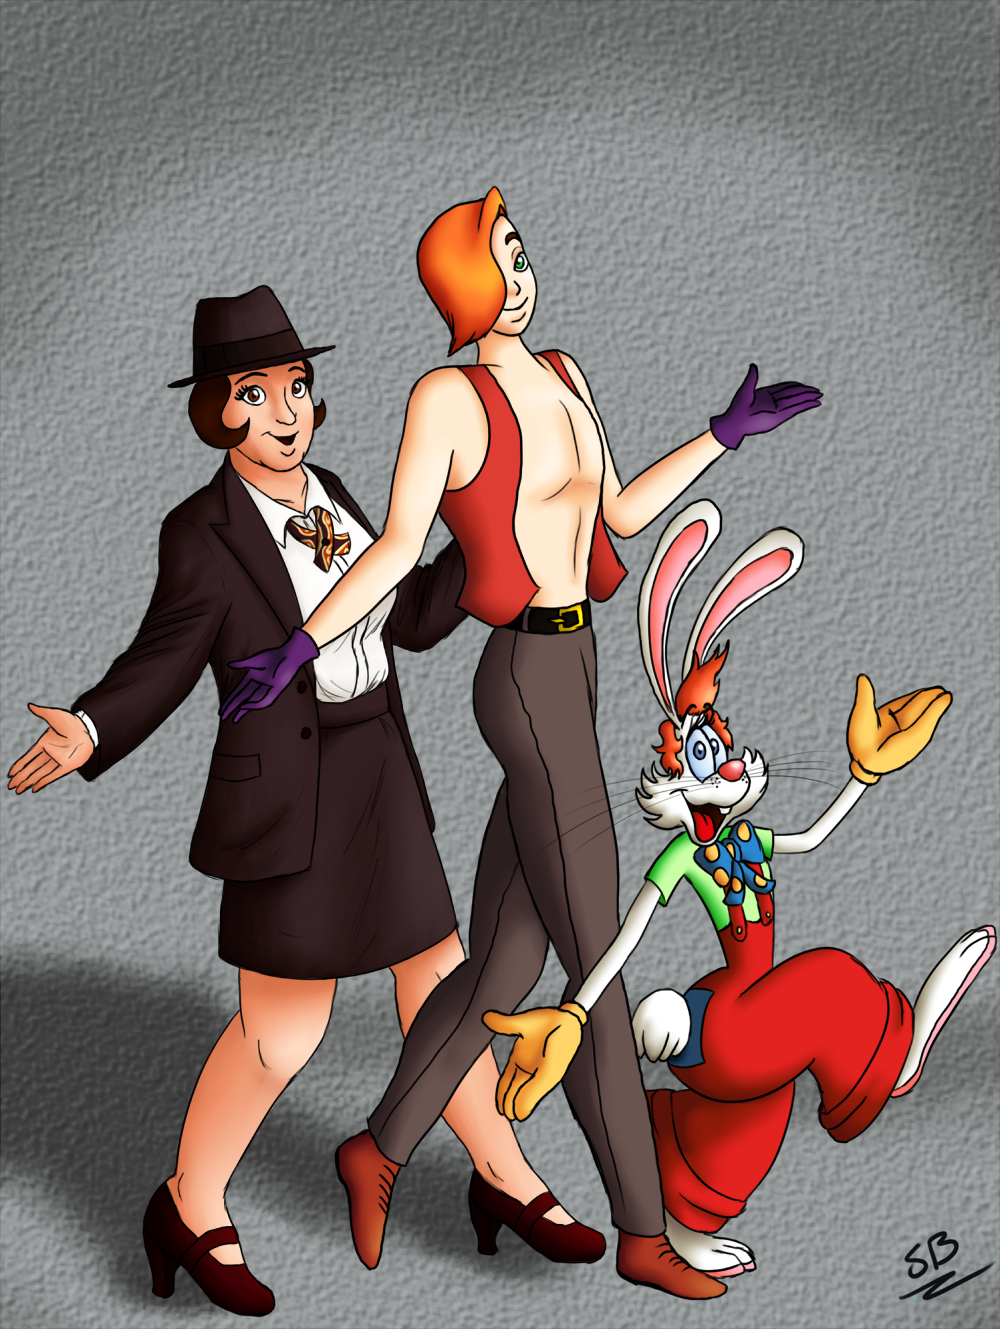 Images about Roger Rabbit.